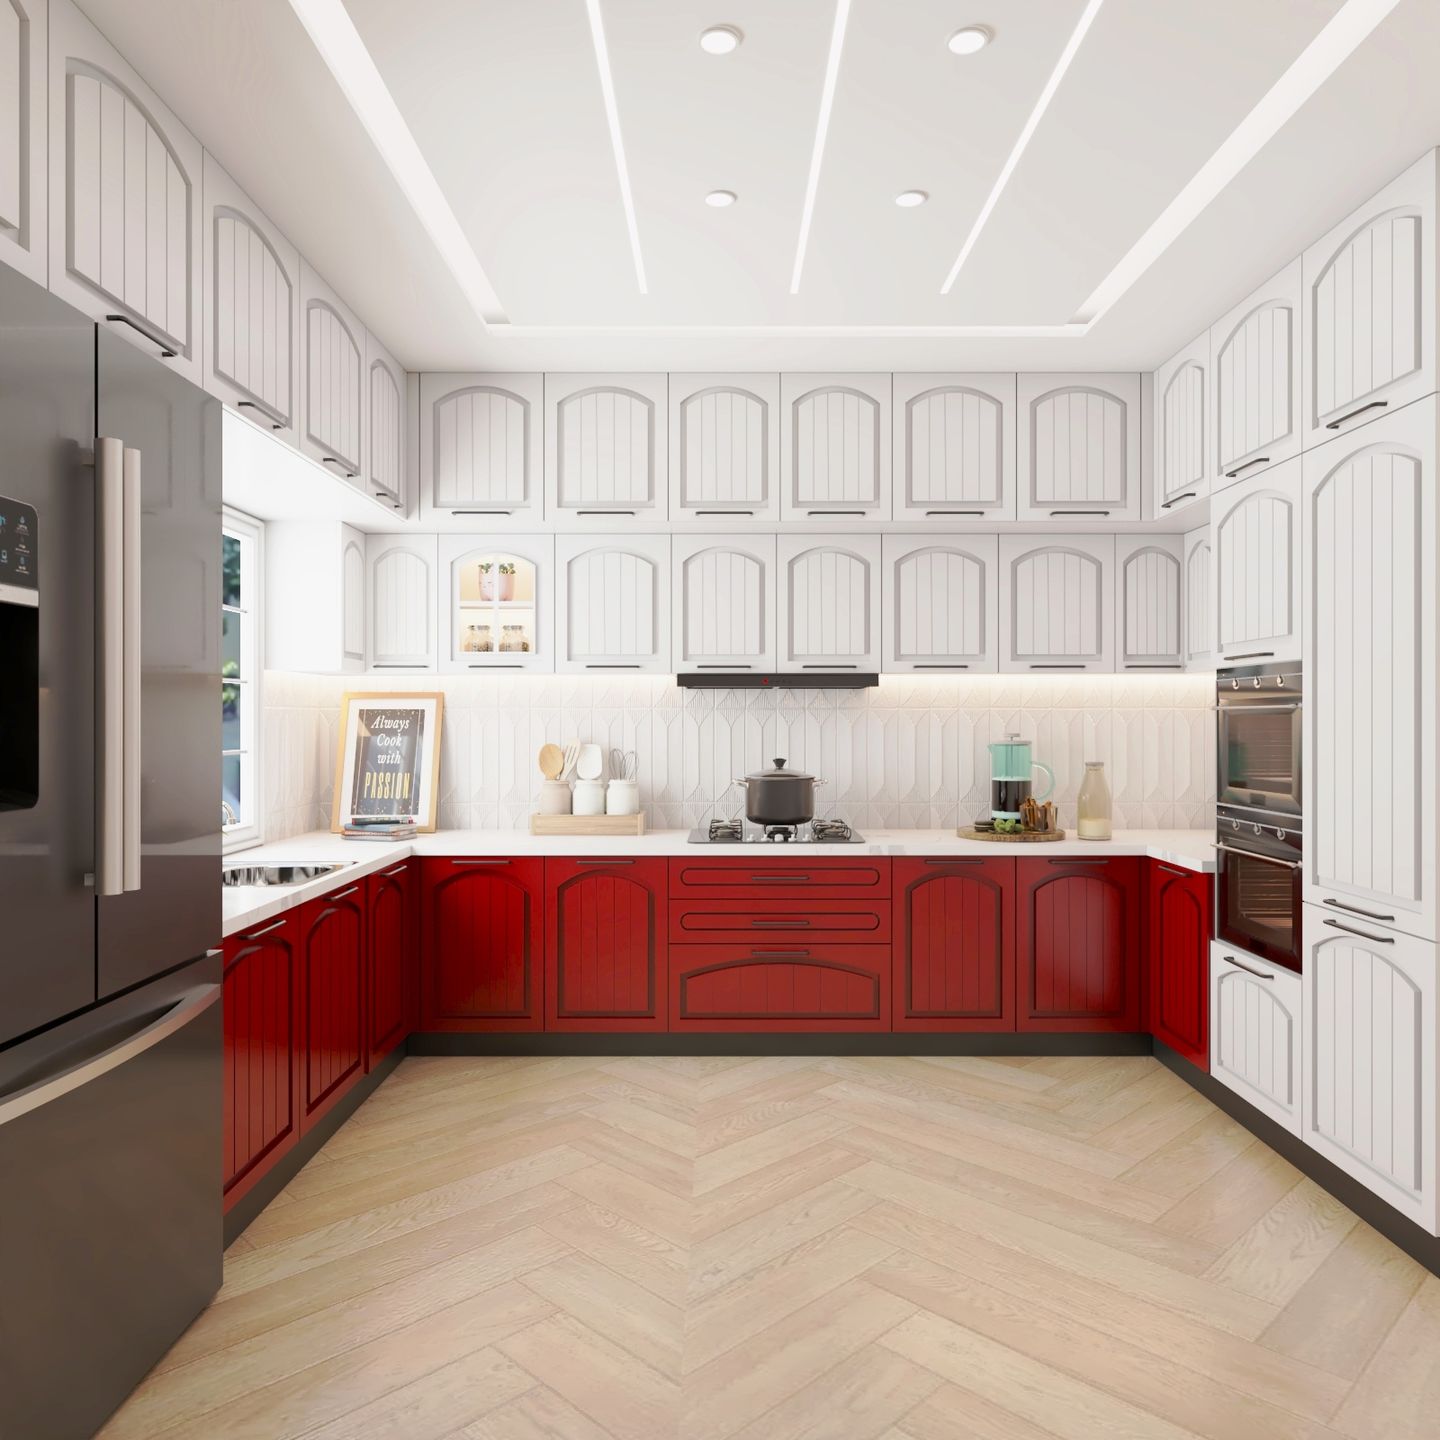 16x16 Ft U-Shaped Kitchen Design With Red And White Cabinets - Livspace